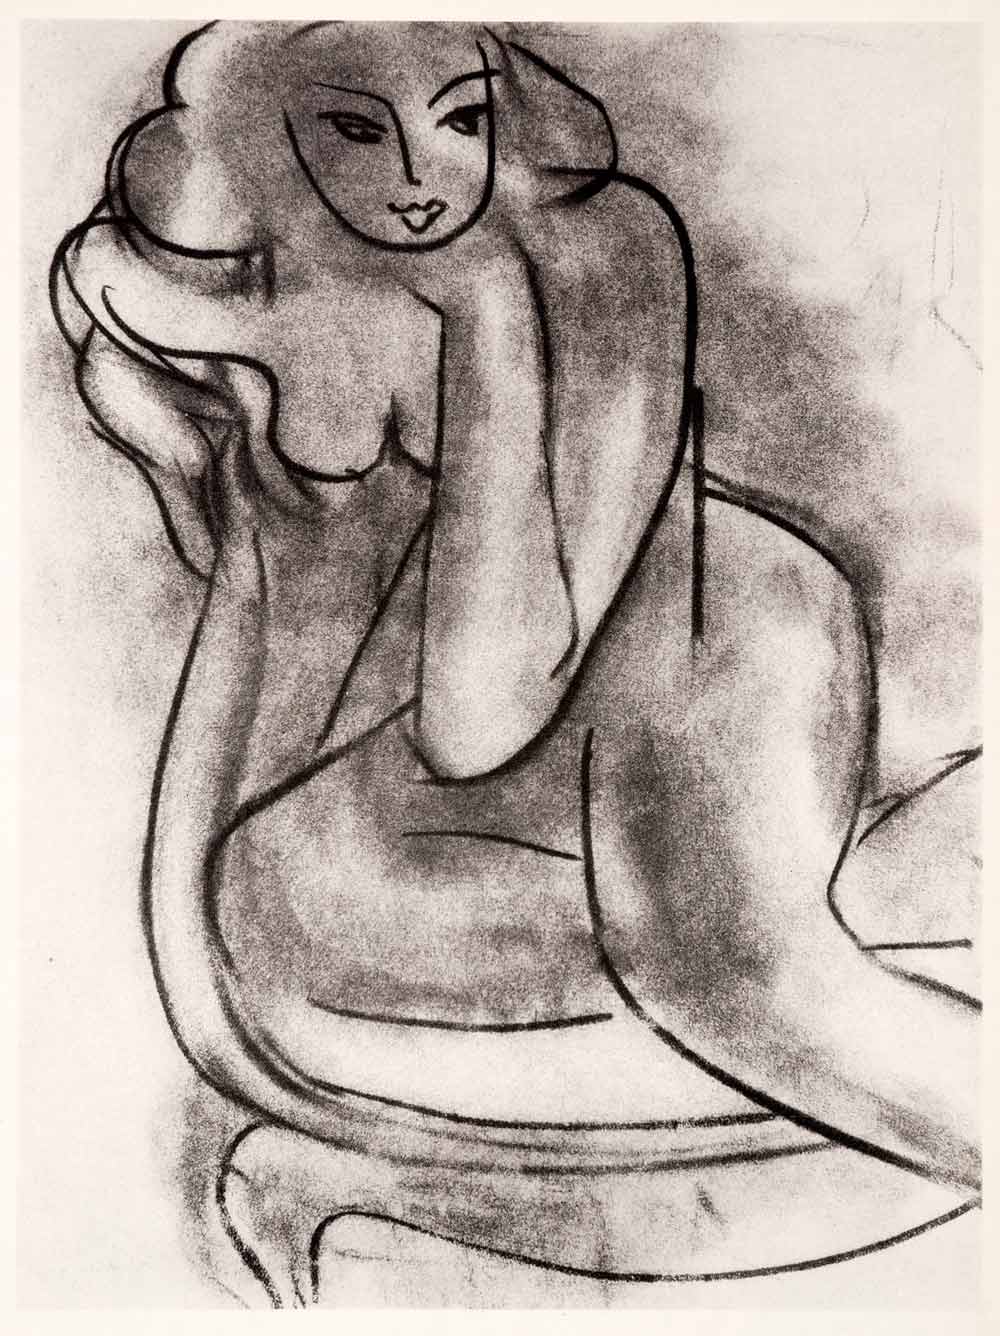 1969 Photolithograph Henri Matisse Art Nude on a Chair Charcoal Sketch Female